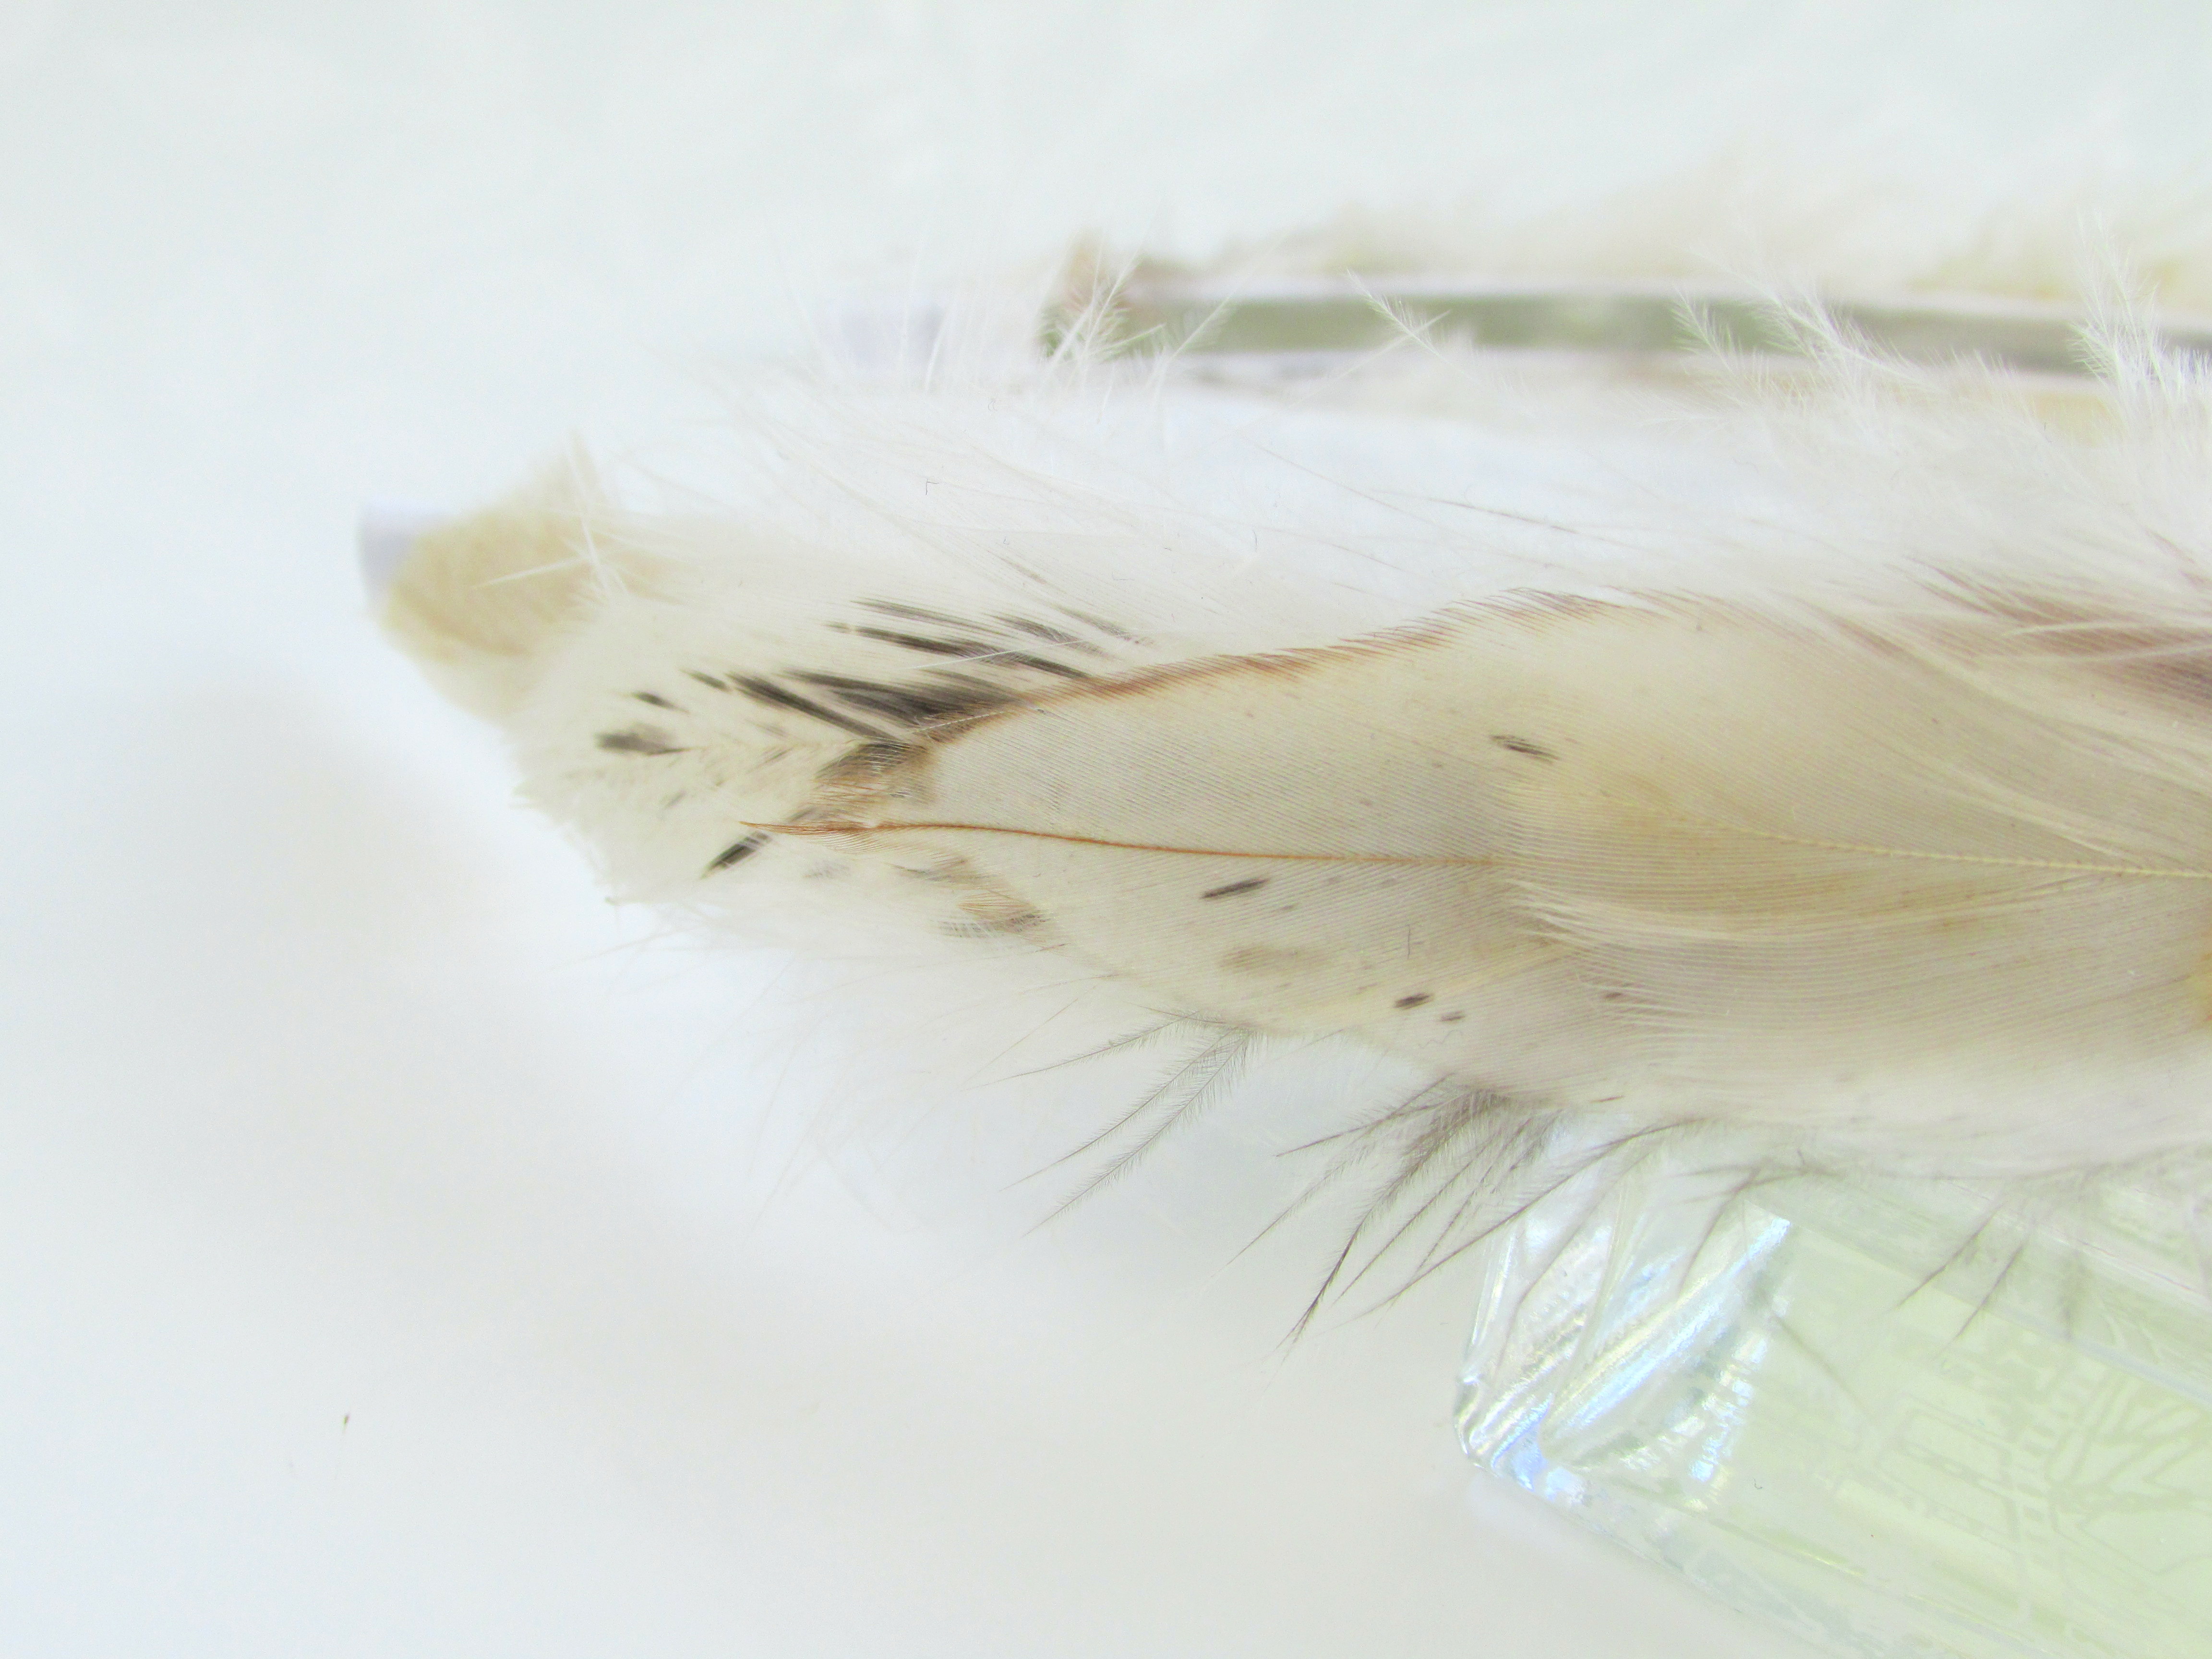 Close up with the feather